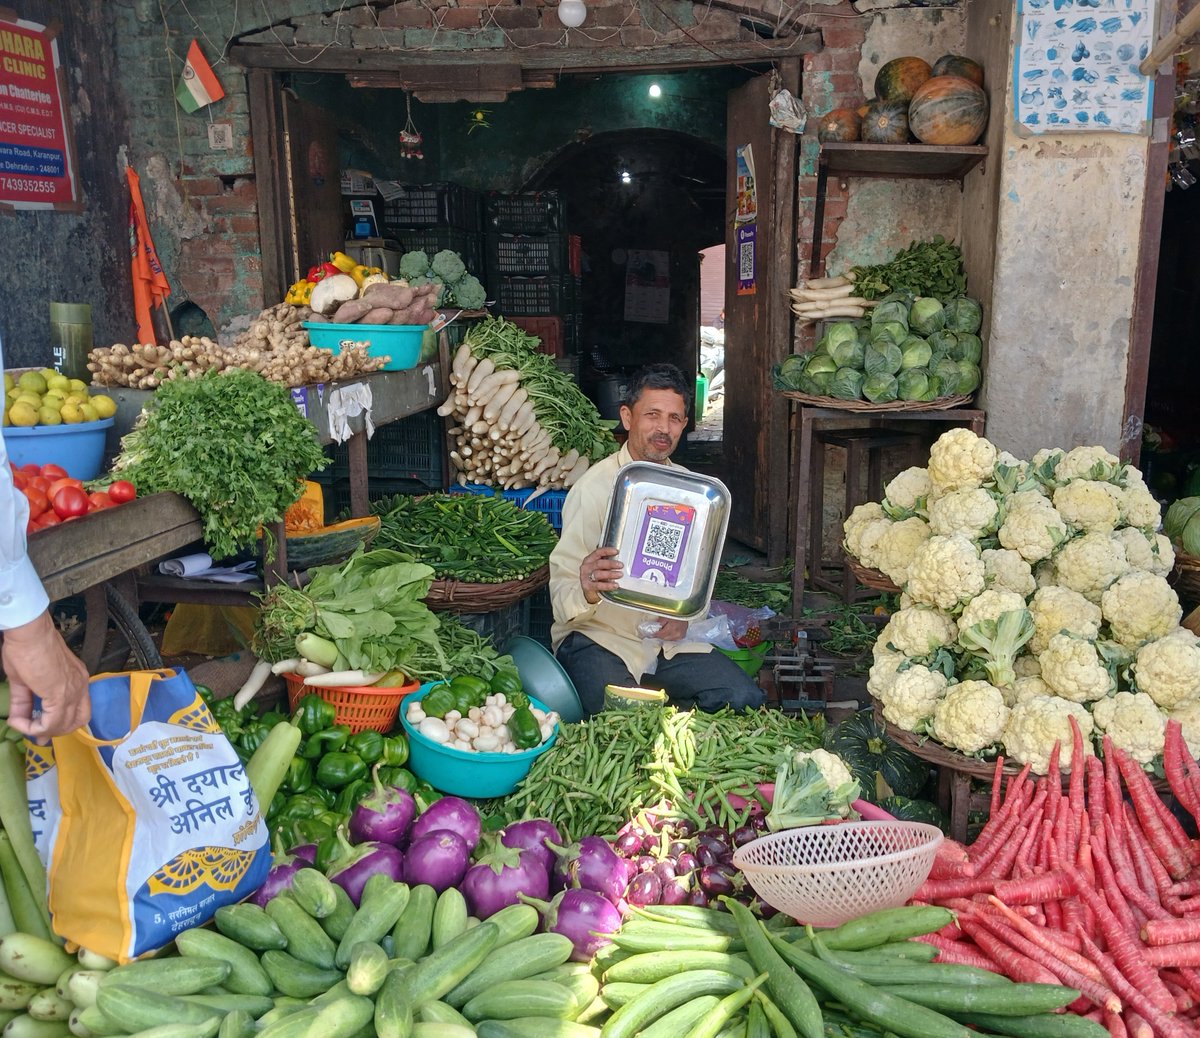 Just as we Indians are super adept in multi-tasking and multi skills, we are equally brilliant at 'multi-utility' of our products and assets. When we asked this local vegetable seller in Sabzi Mandi, Dehradun for the UPI bar code to pay, he promptly turned his weighing pan up…